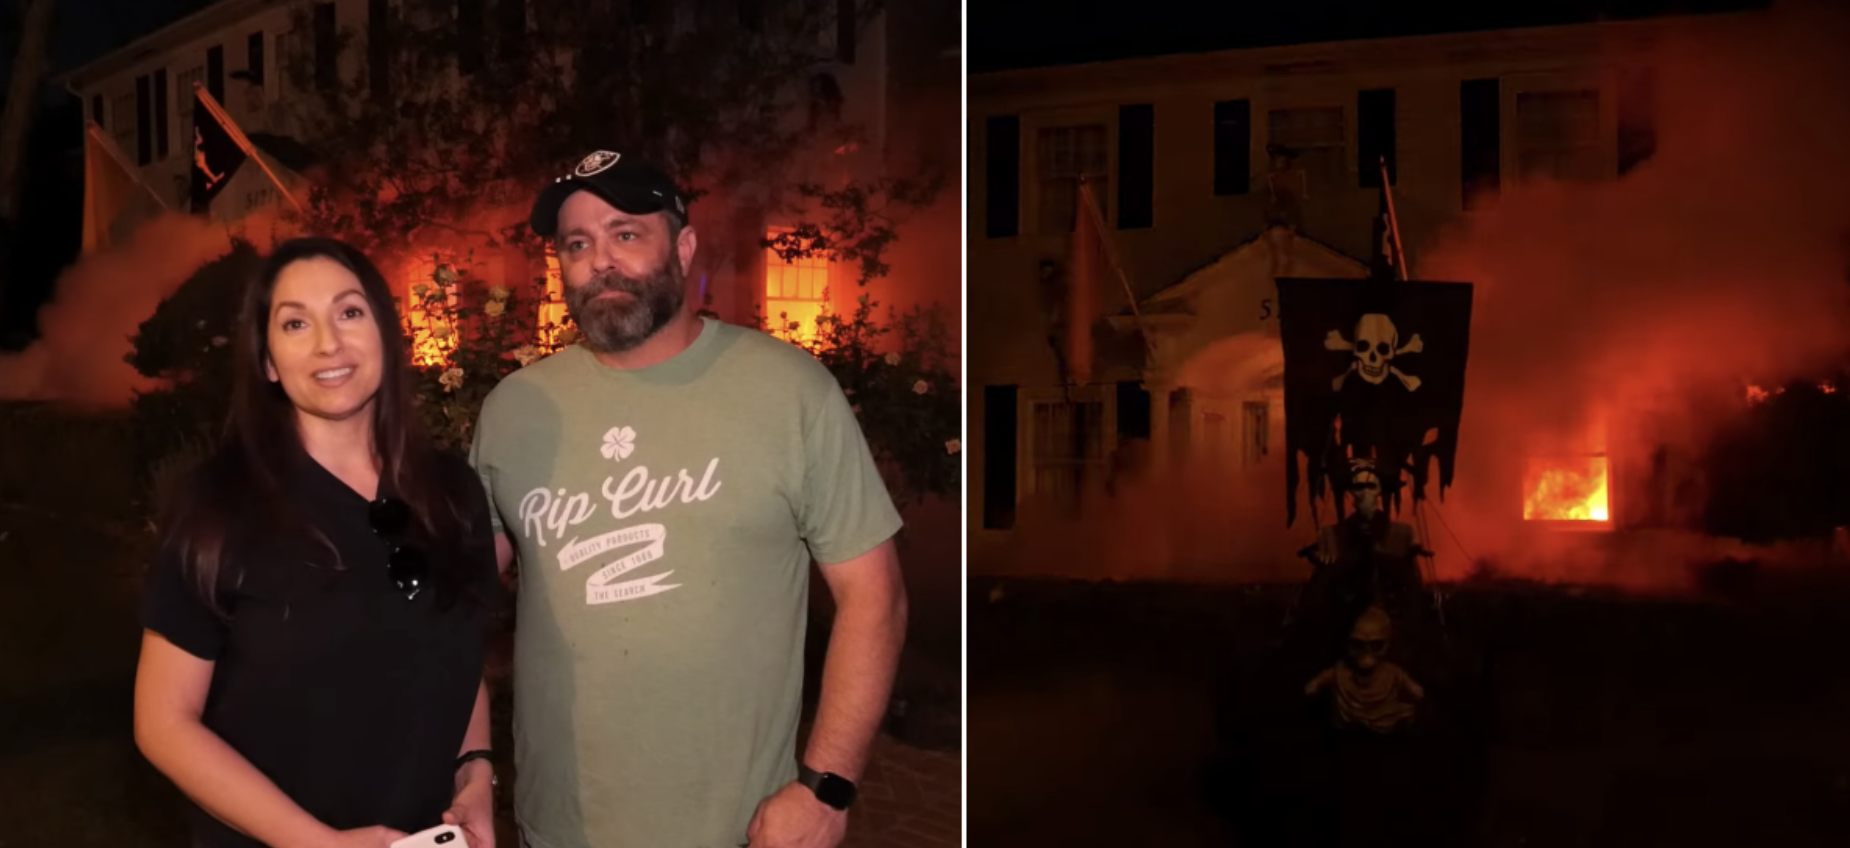 Neighbors Called 911 Over a Family\'s Realistic Halloween Decorations